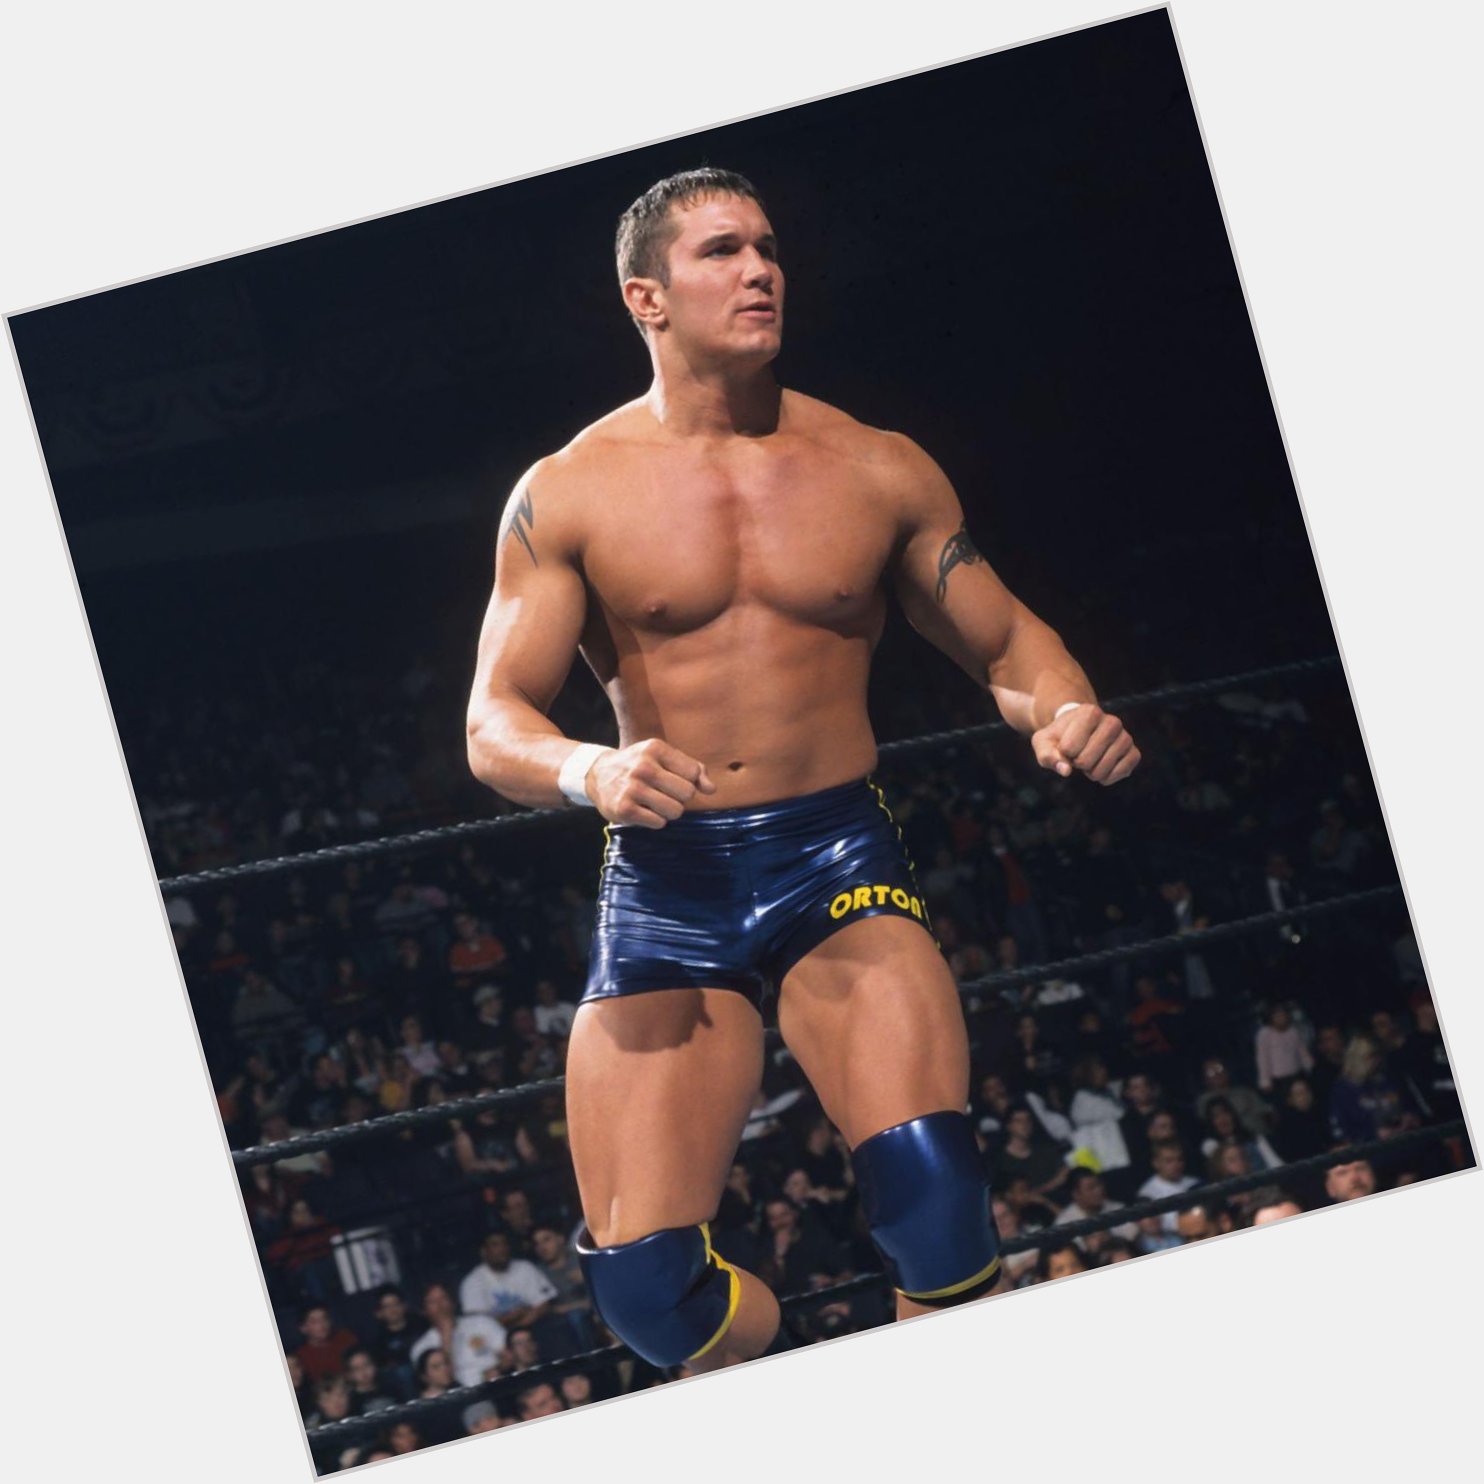 Happy 40th Birthday to one of my favorite wrestlers of all time Randy Orton 